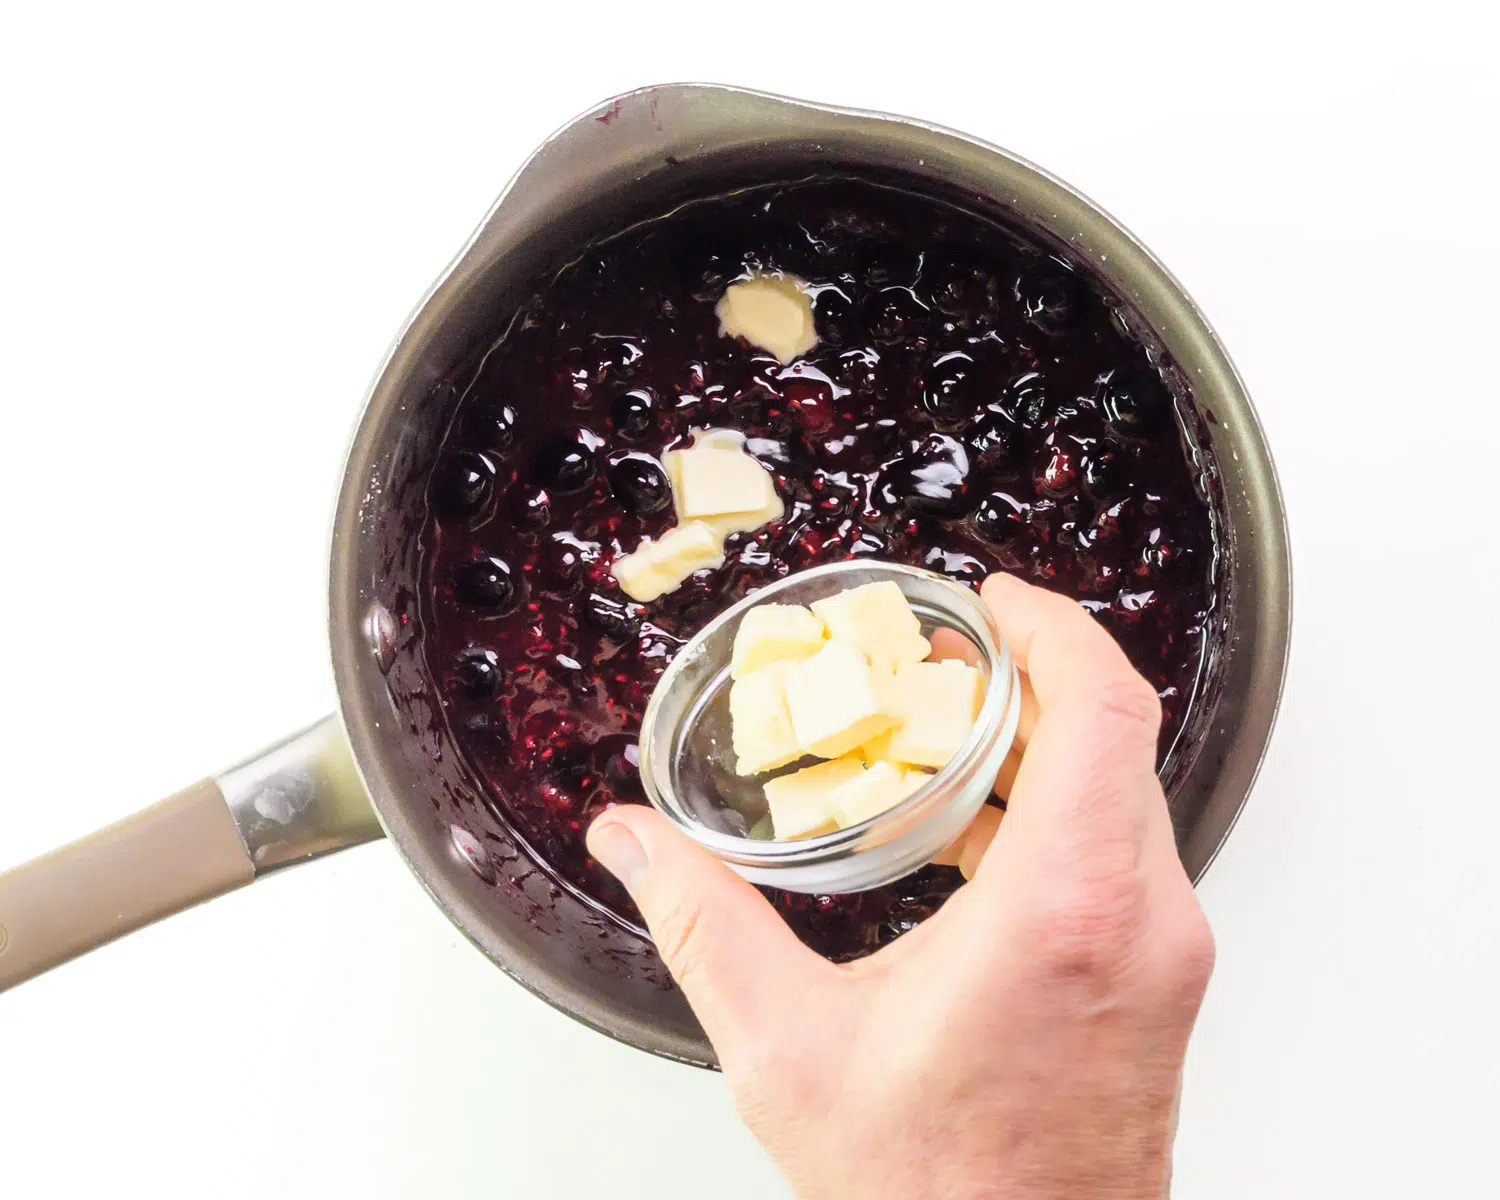 Vegan butter is being poured from a bowl into a saucepan with a berry sauce.